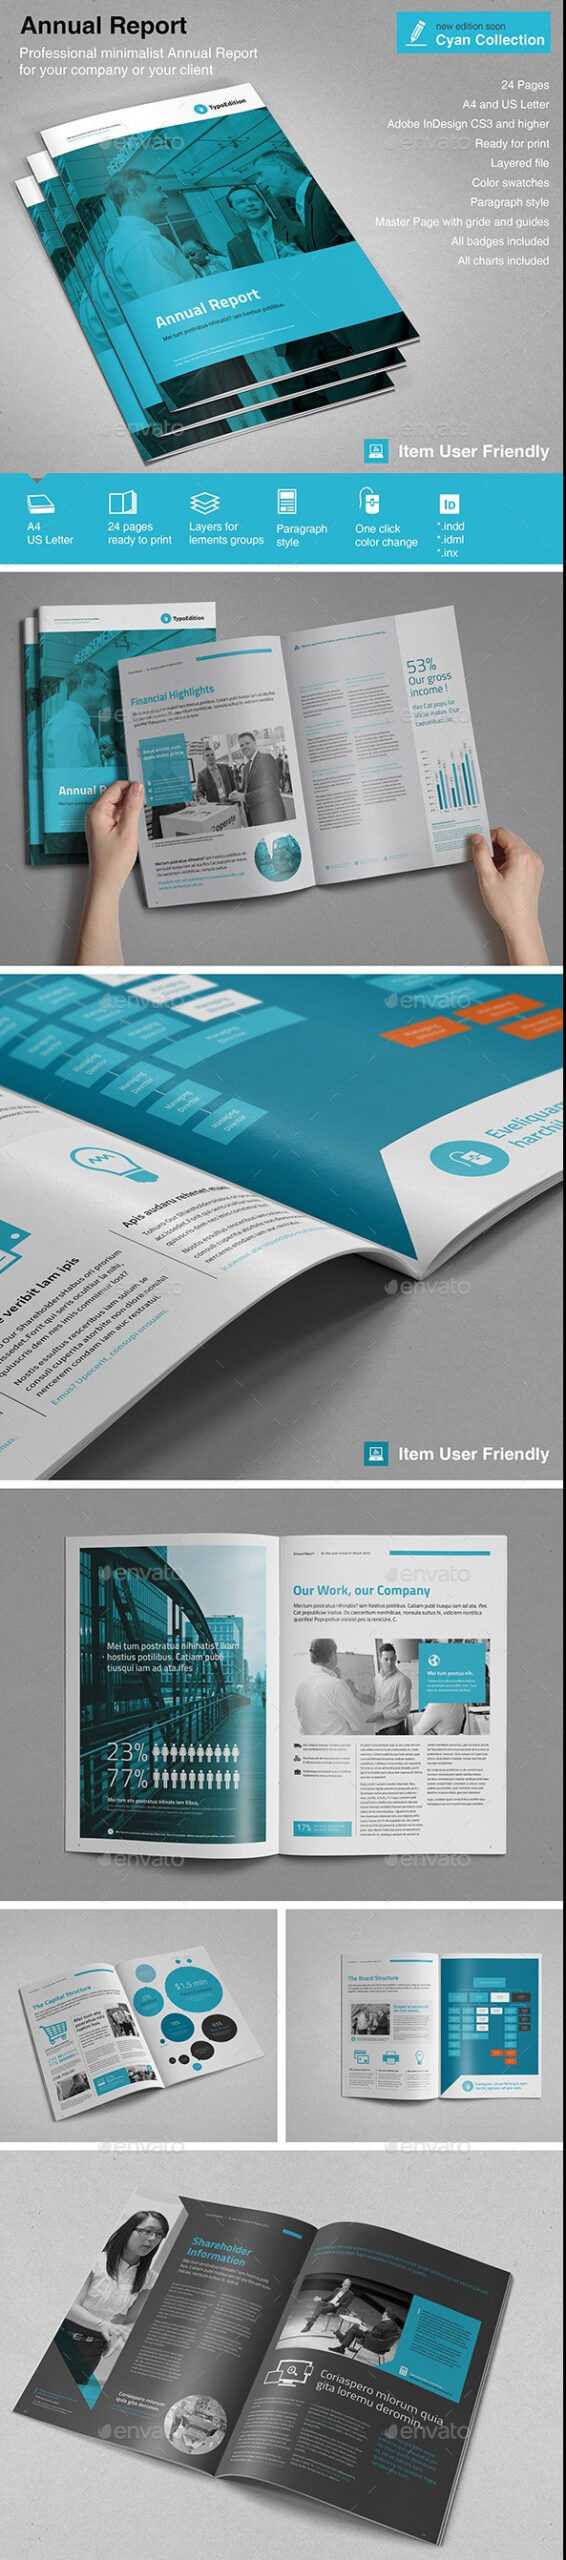 32+ Indesign Annual Report Templates For Corporate With Regard To Free Indesign Report Templates